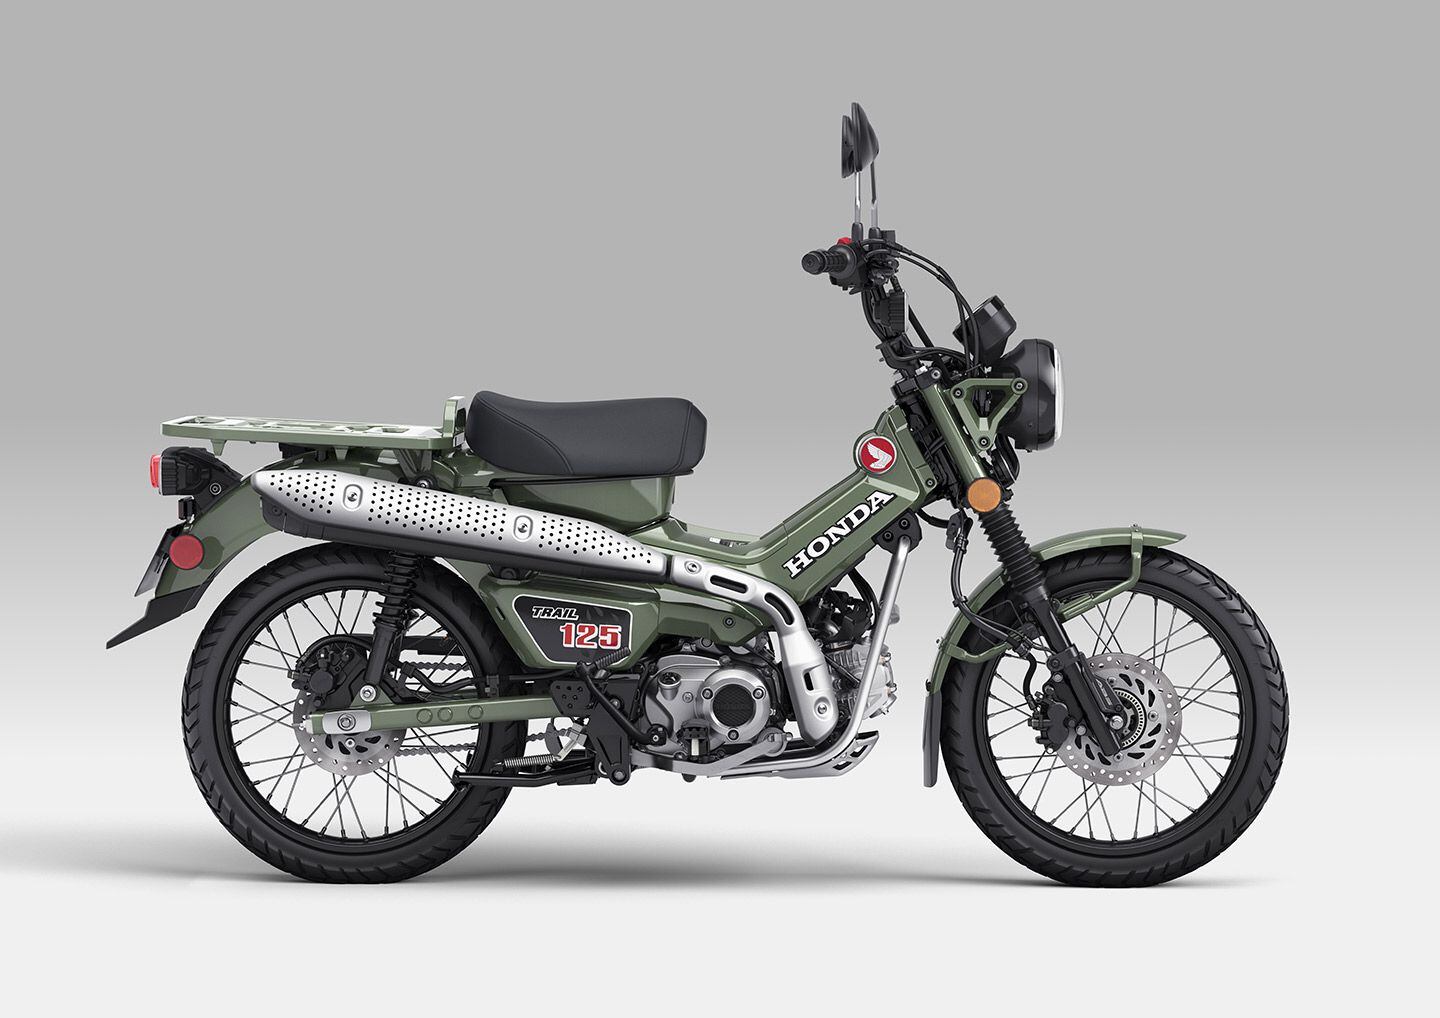 The Trail125’s engine that’s plucked from the 2022 Super Cub has the Japanese-market C110’s bottom end and the Grom’s single overhead cam, two-valve top end. The Trail’s muffler may look the same as it did in 2022, but the internals have been revised.